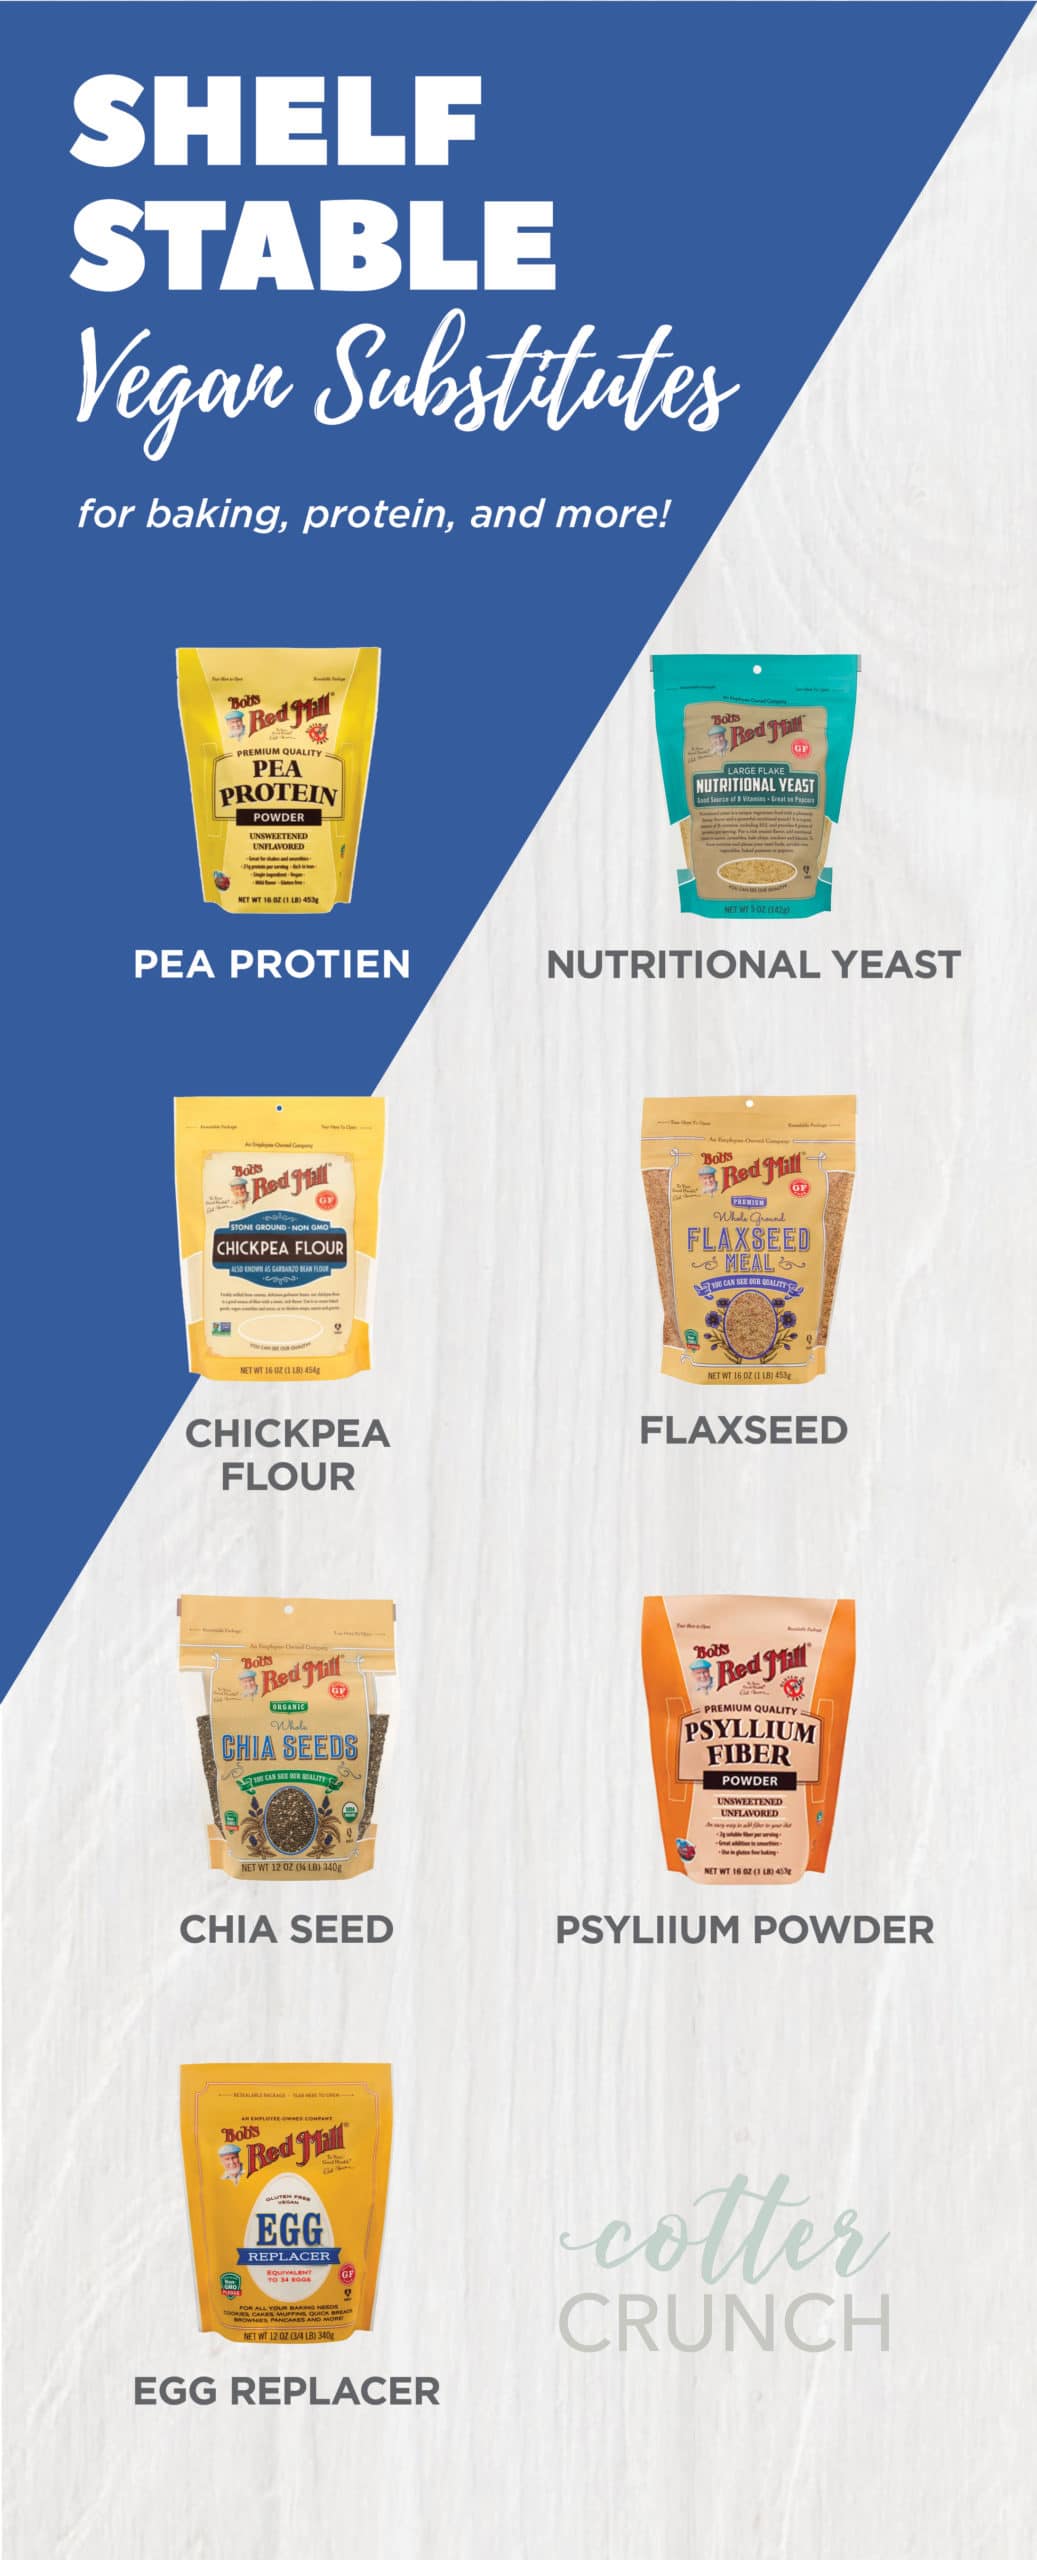 Graphic for shelf stable vegan substitutes for baking and protein